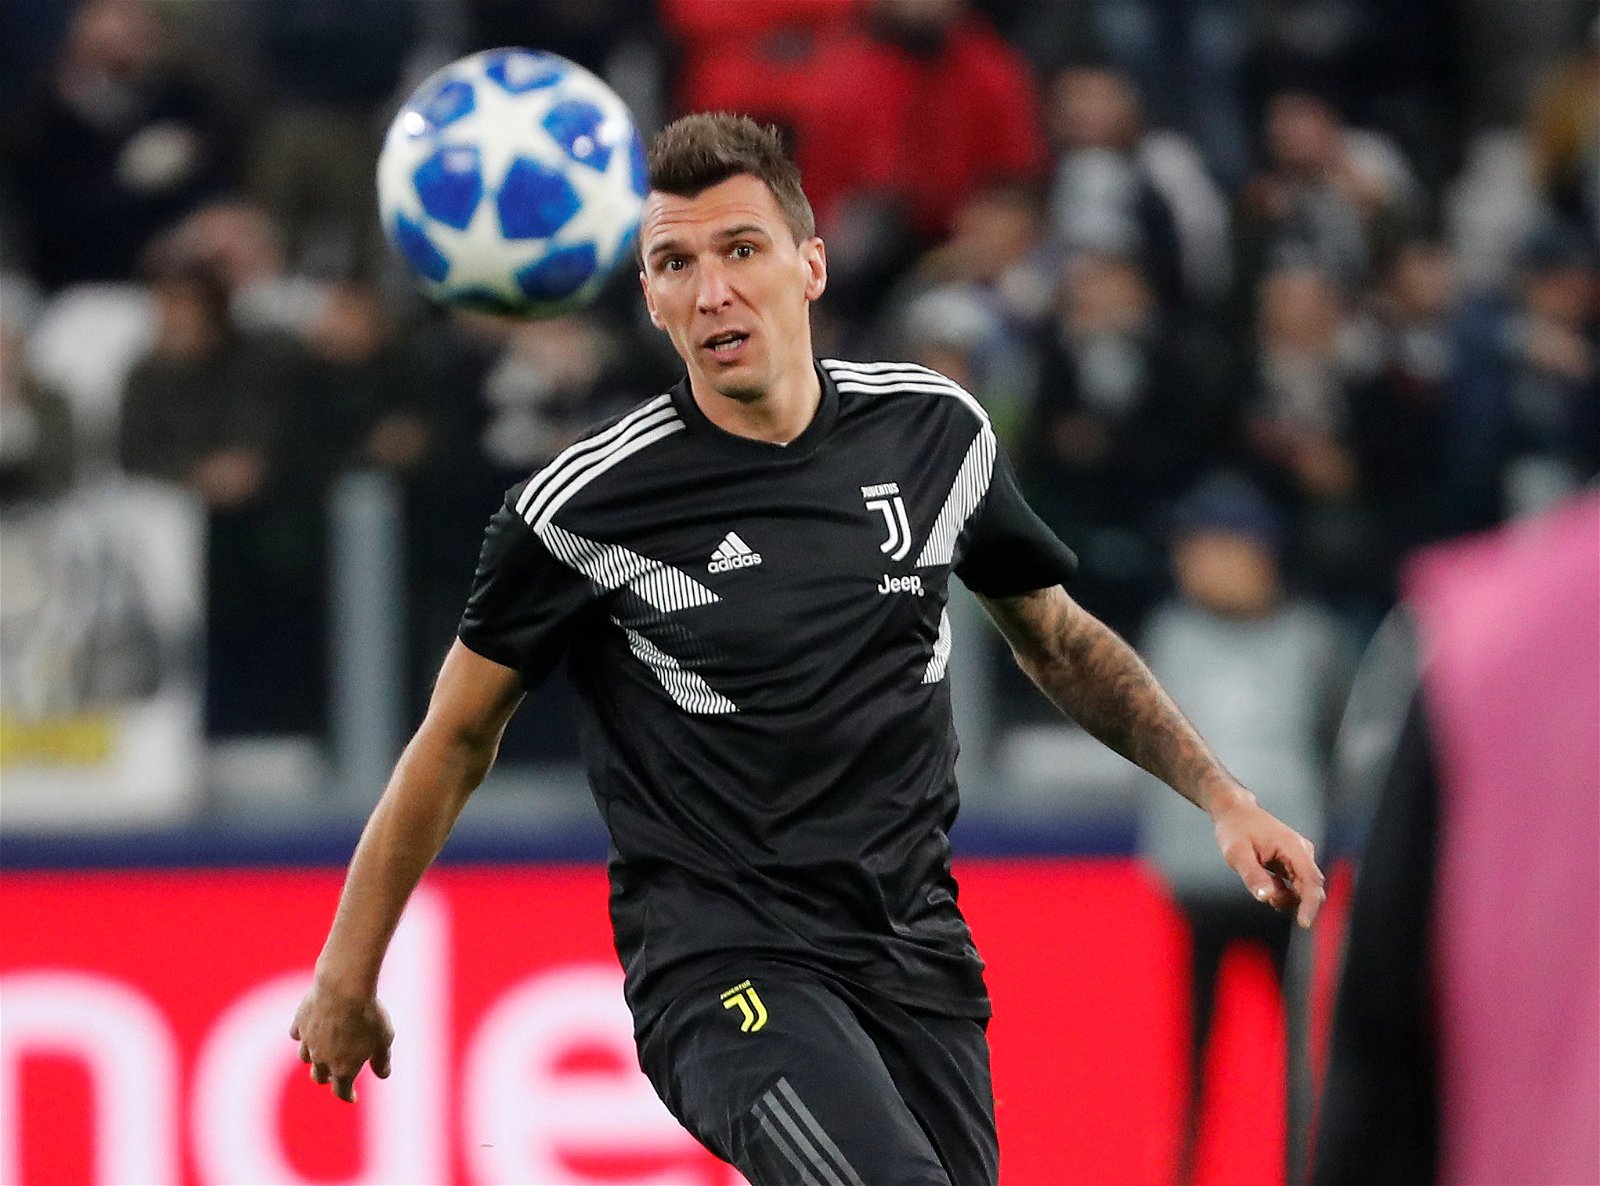 Manchester United have verbal agreement with Juventus to sign Mario Mandzukic